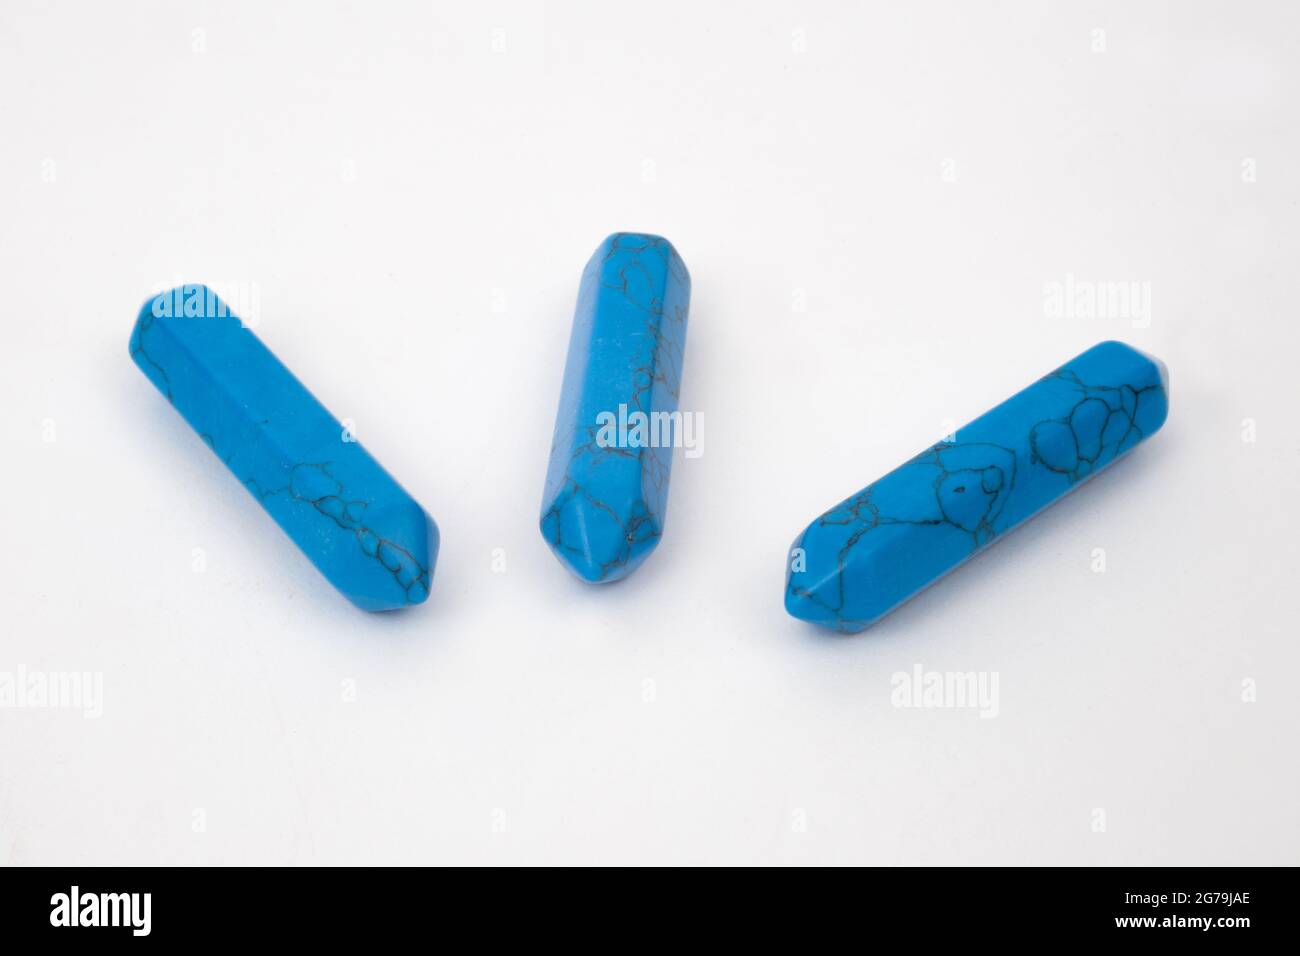 Blue Turquoise points, gemstones used for healing photographed against a white background Stock Photo